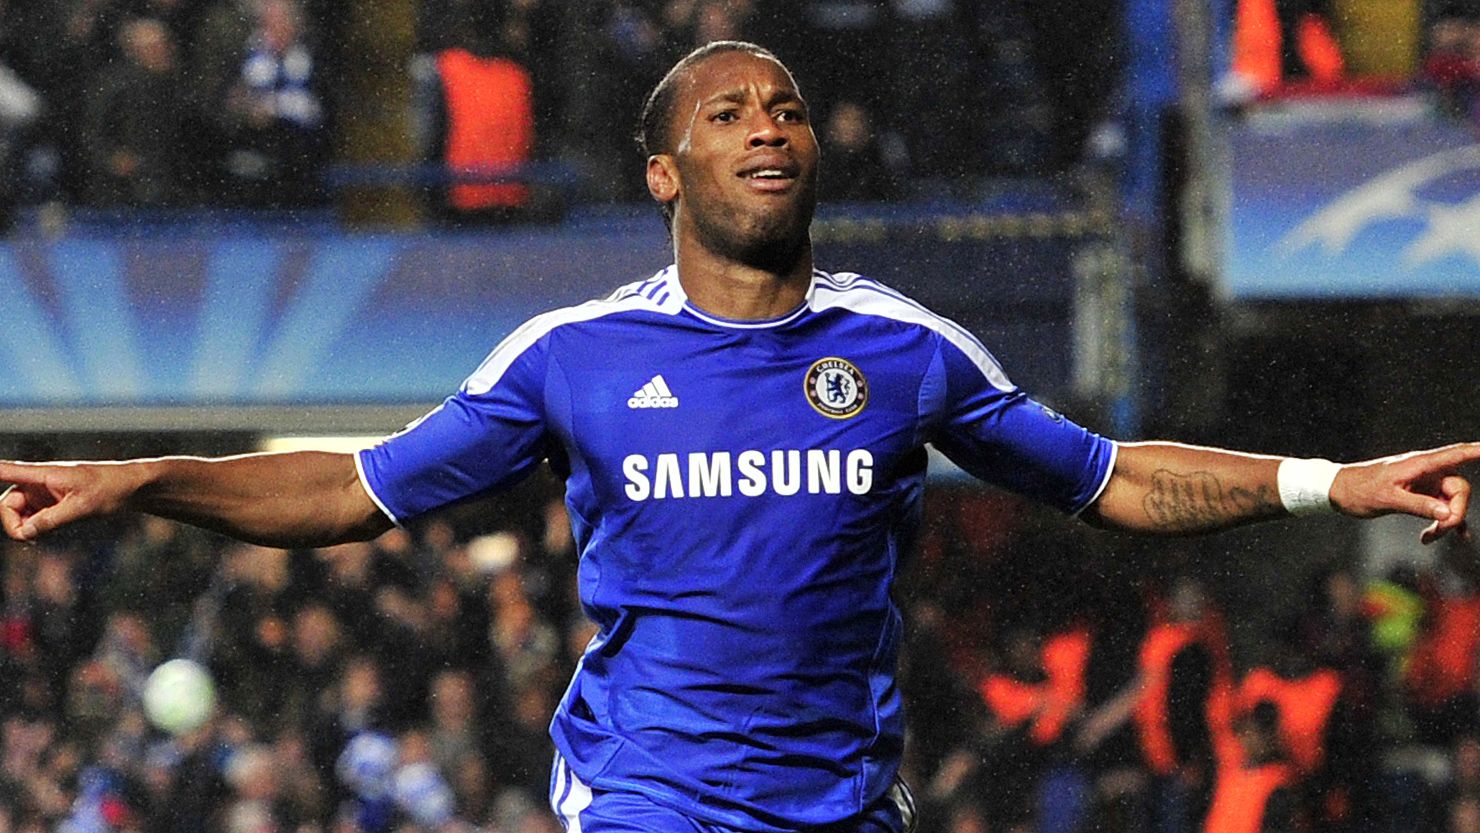 Chelsea's Didier Drogba celebrates after scoring with the last kick of the first half against Barcelona.